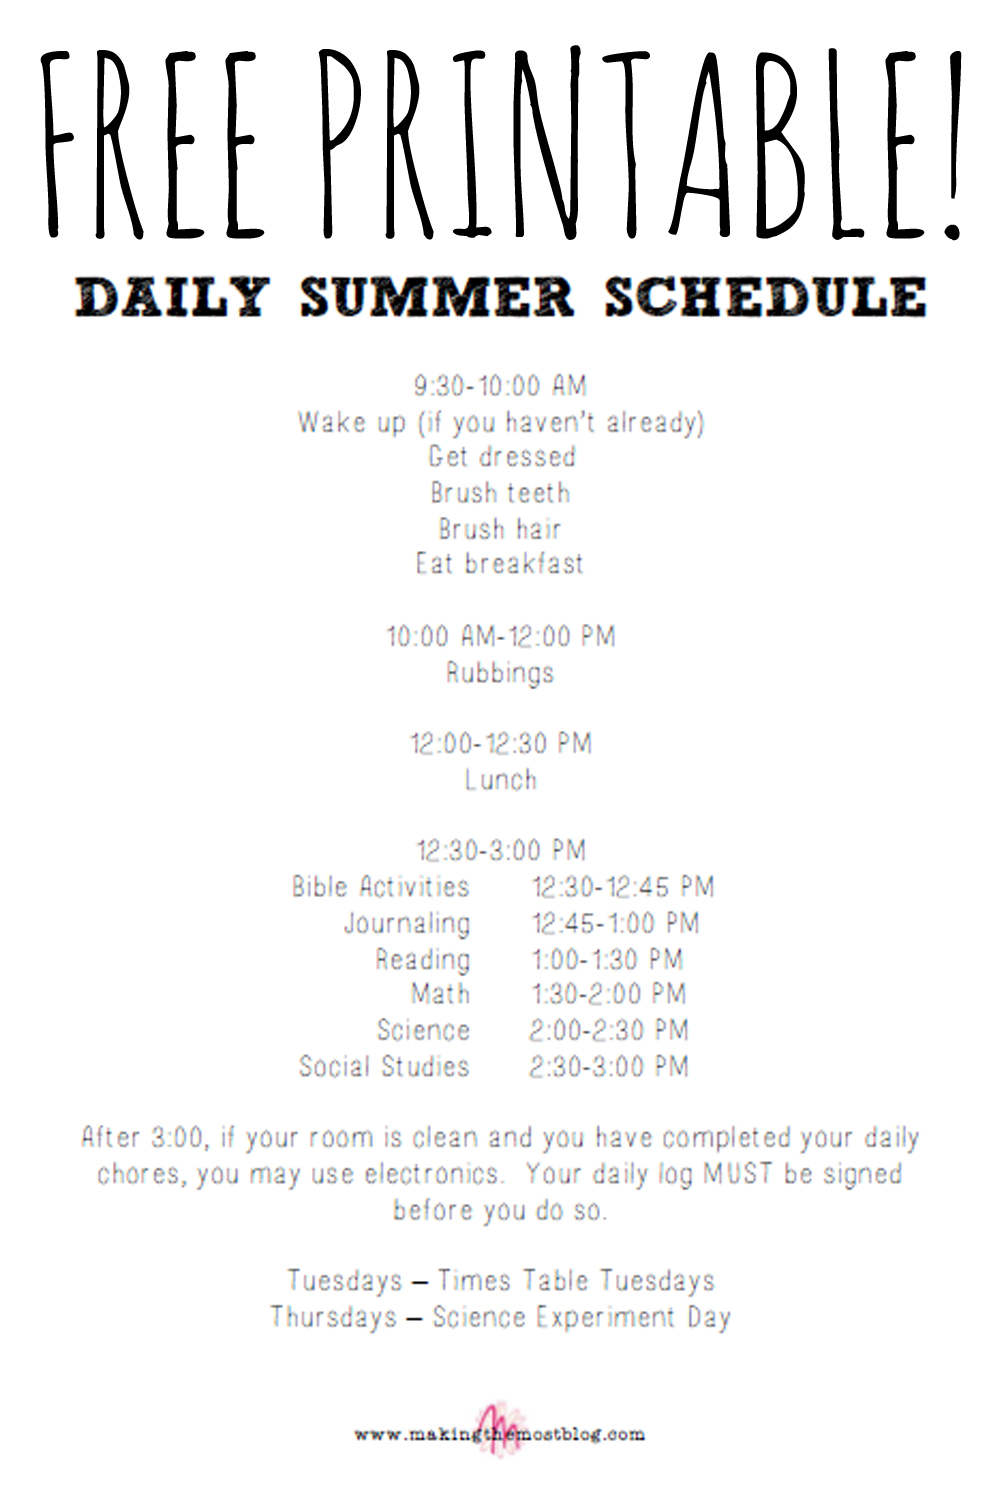 FREE! Printable Summer Schedule | Making the Most Blog